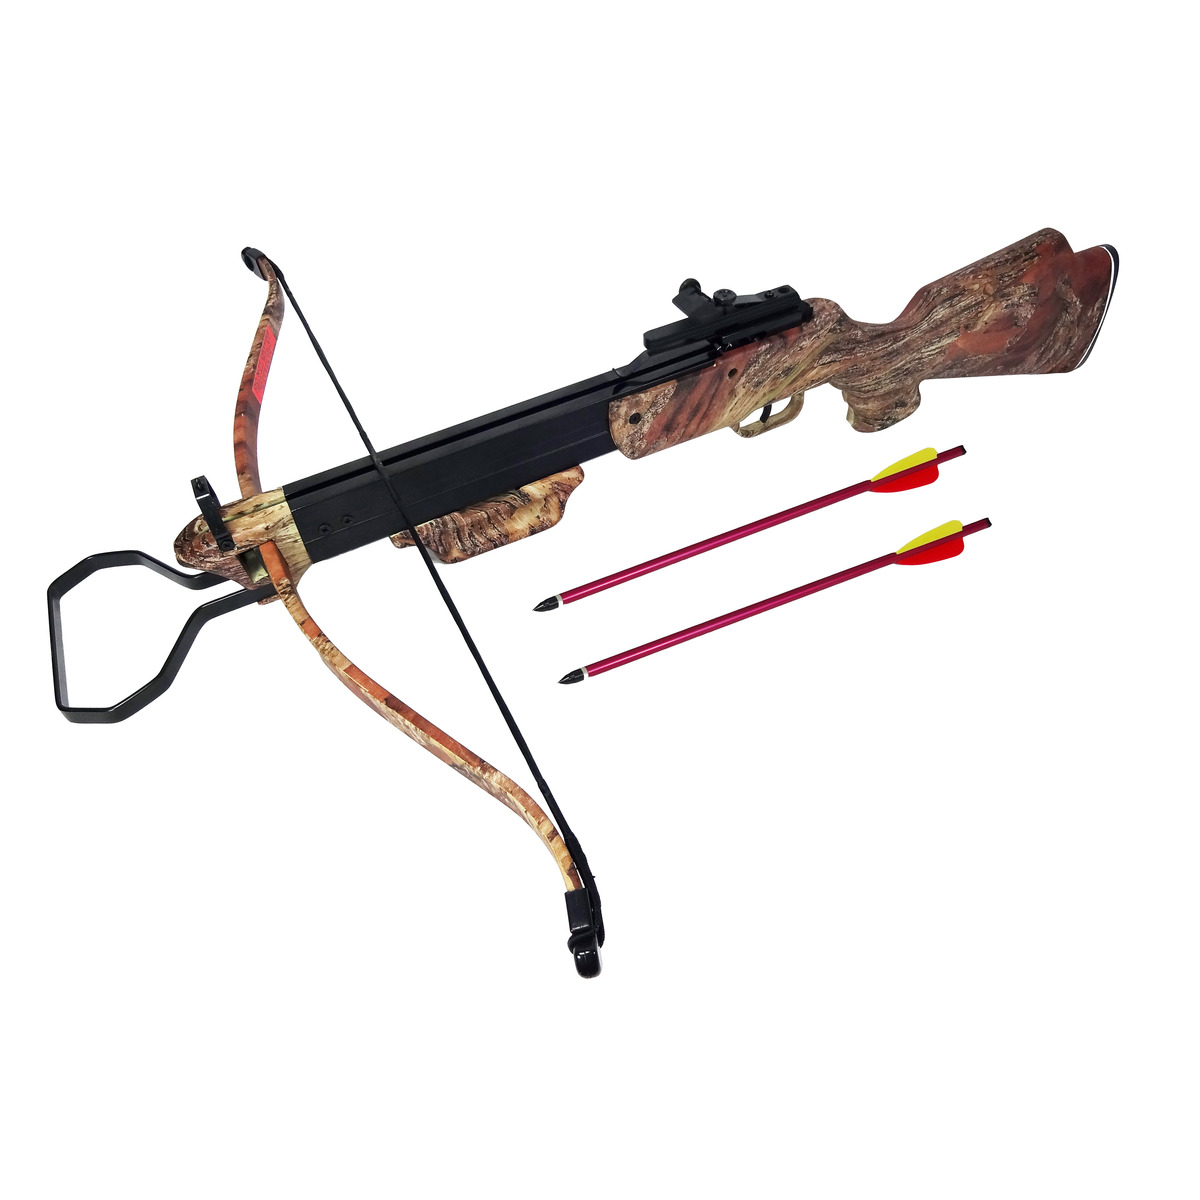 Man Kung 150 lbs Crossbow Hunting Cross Bow w 2 Bolts Arrows